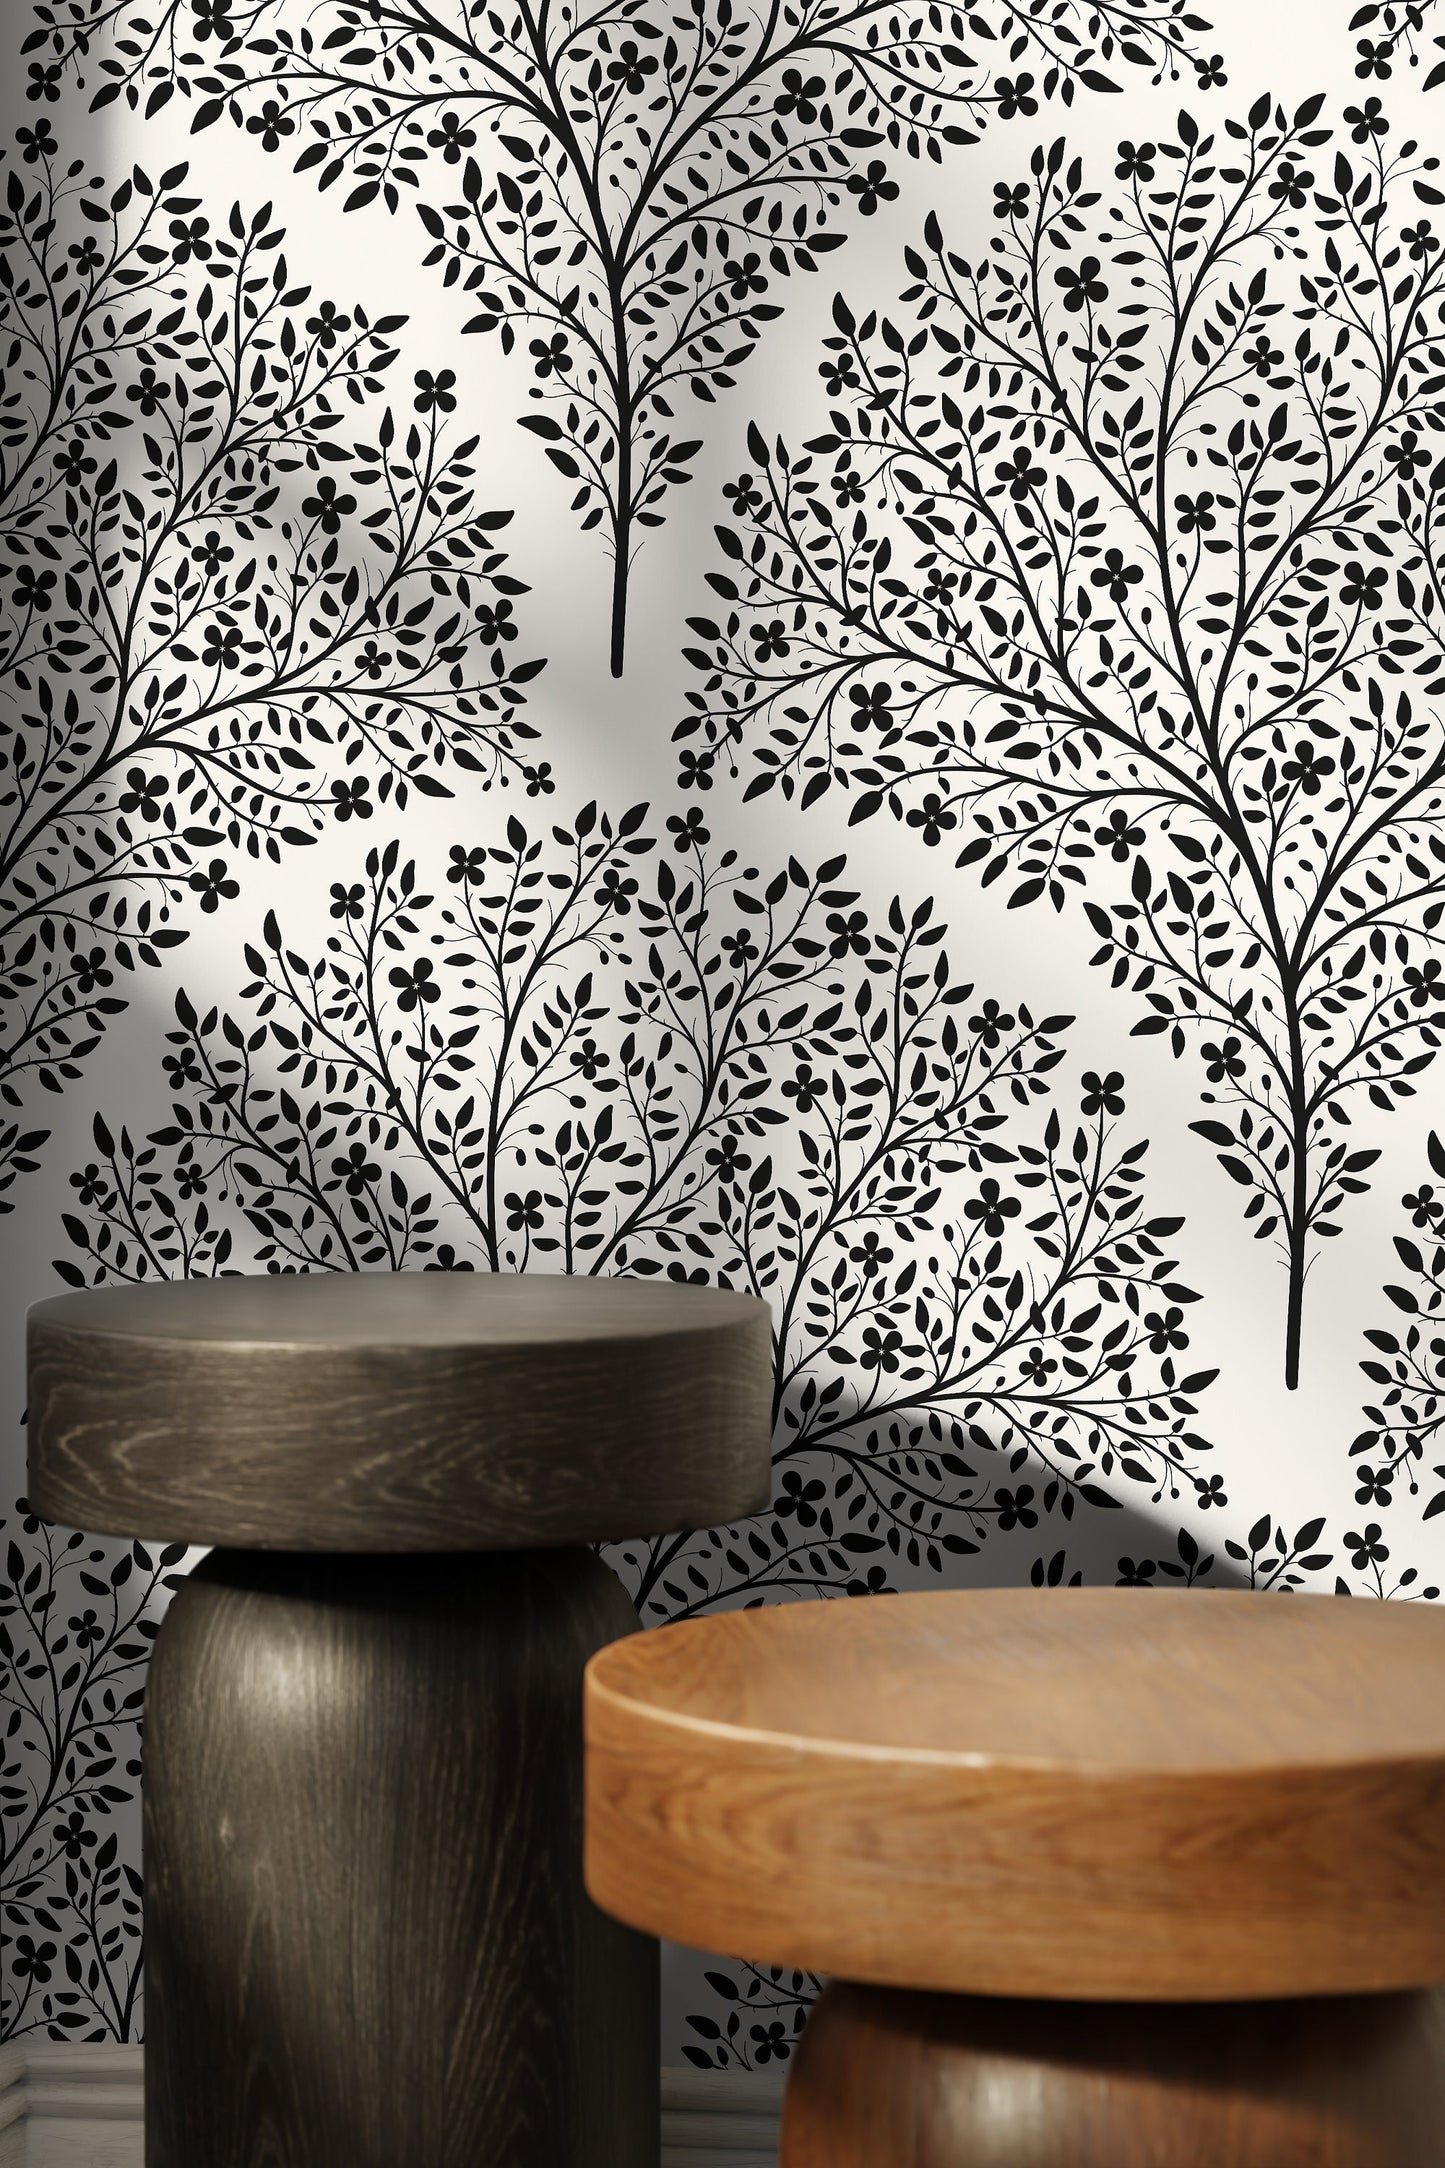 Black and Beige Tree Floral / Wallpaper Peel and Stick Wallpaper Removable Wallpaper Home Decor Wall Art Wall Decor Room Decor - C813